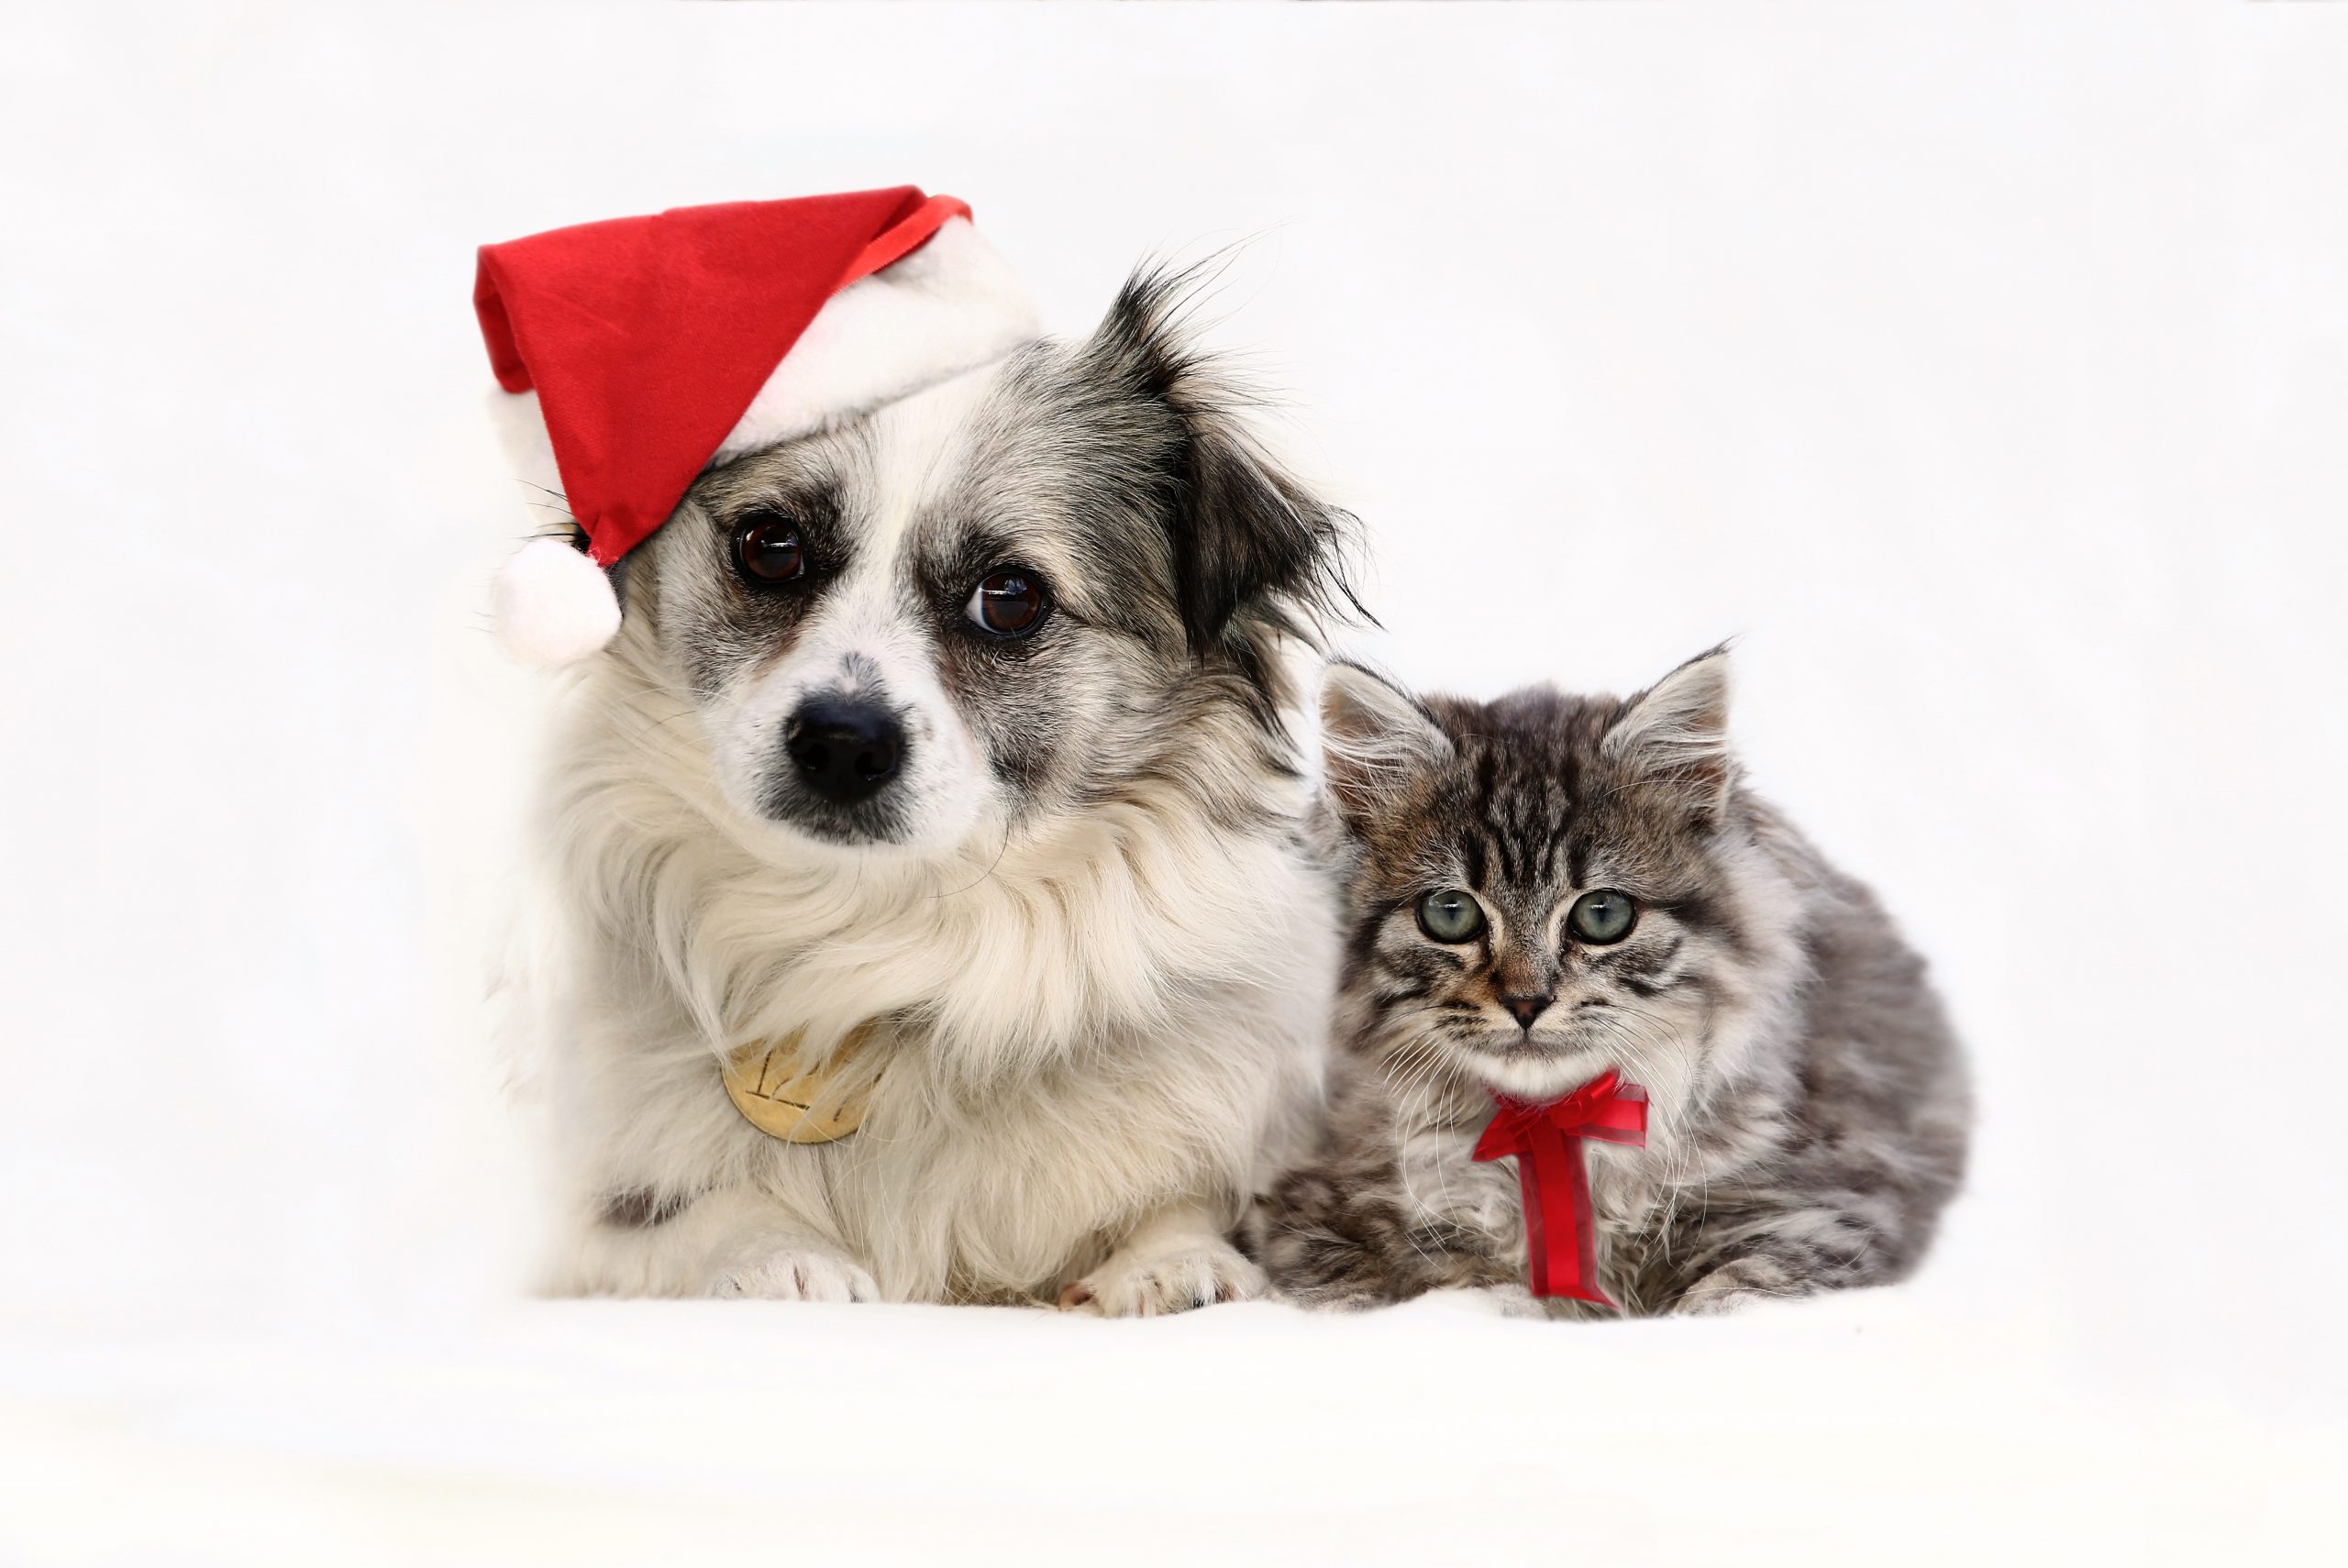 Give toys and joy to shelter pets this Christmas – Lost Dogs Home